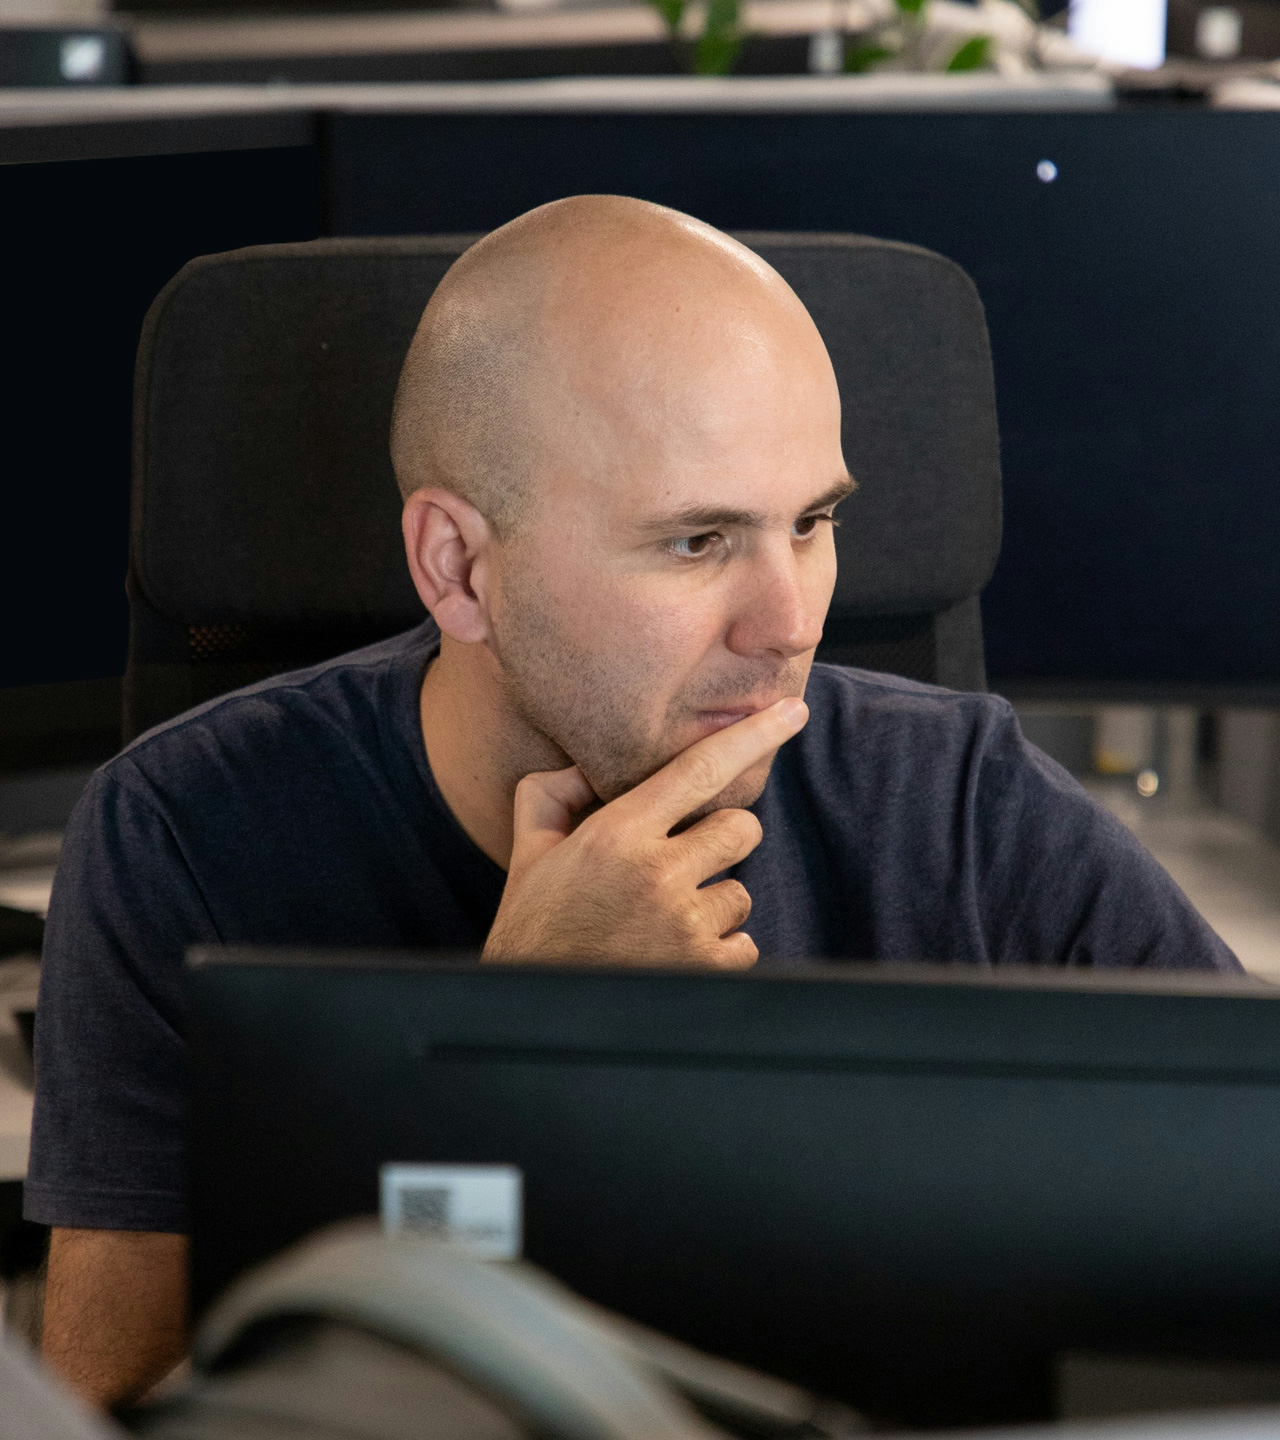 Man looking pensively into the computer screen